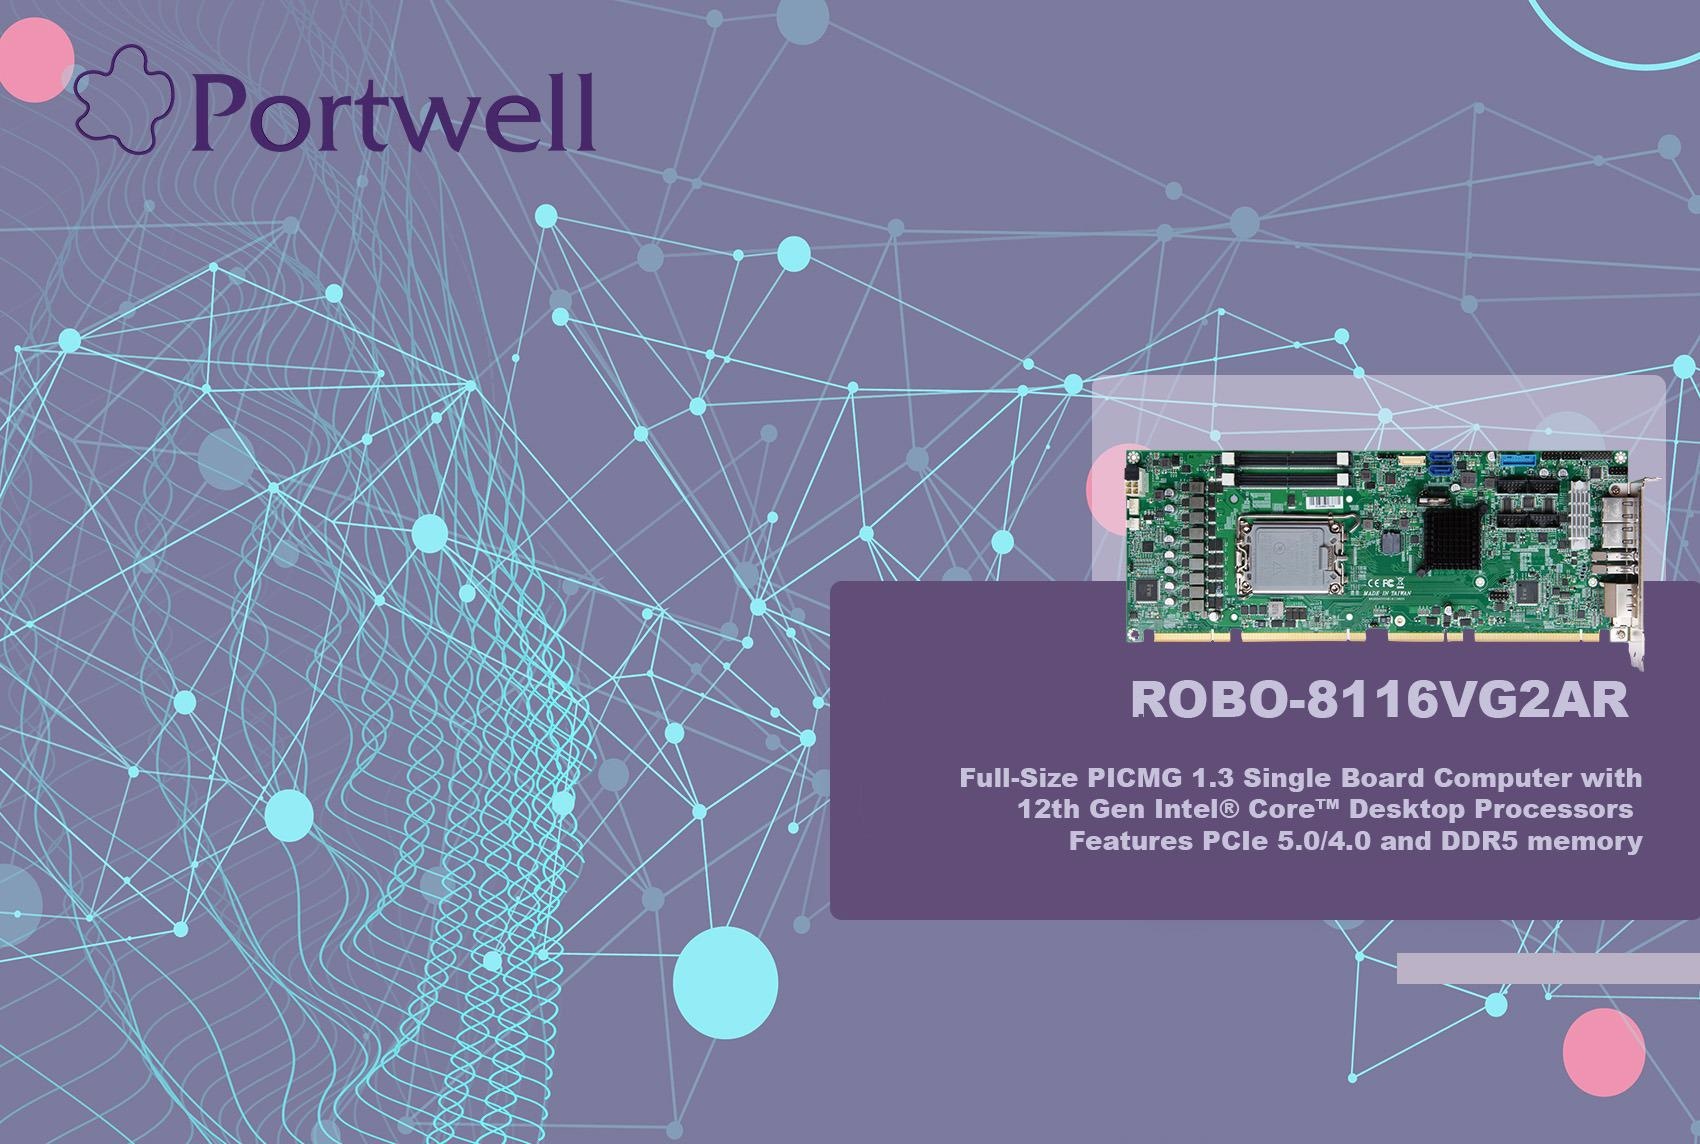 Portwell launches first full-size PICMG 1.3 single board computer with 12th gen intel® core™ desktop processors (alder lake S platform)